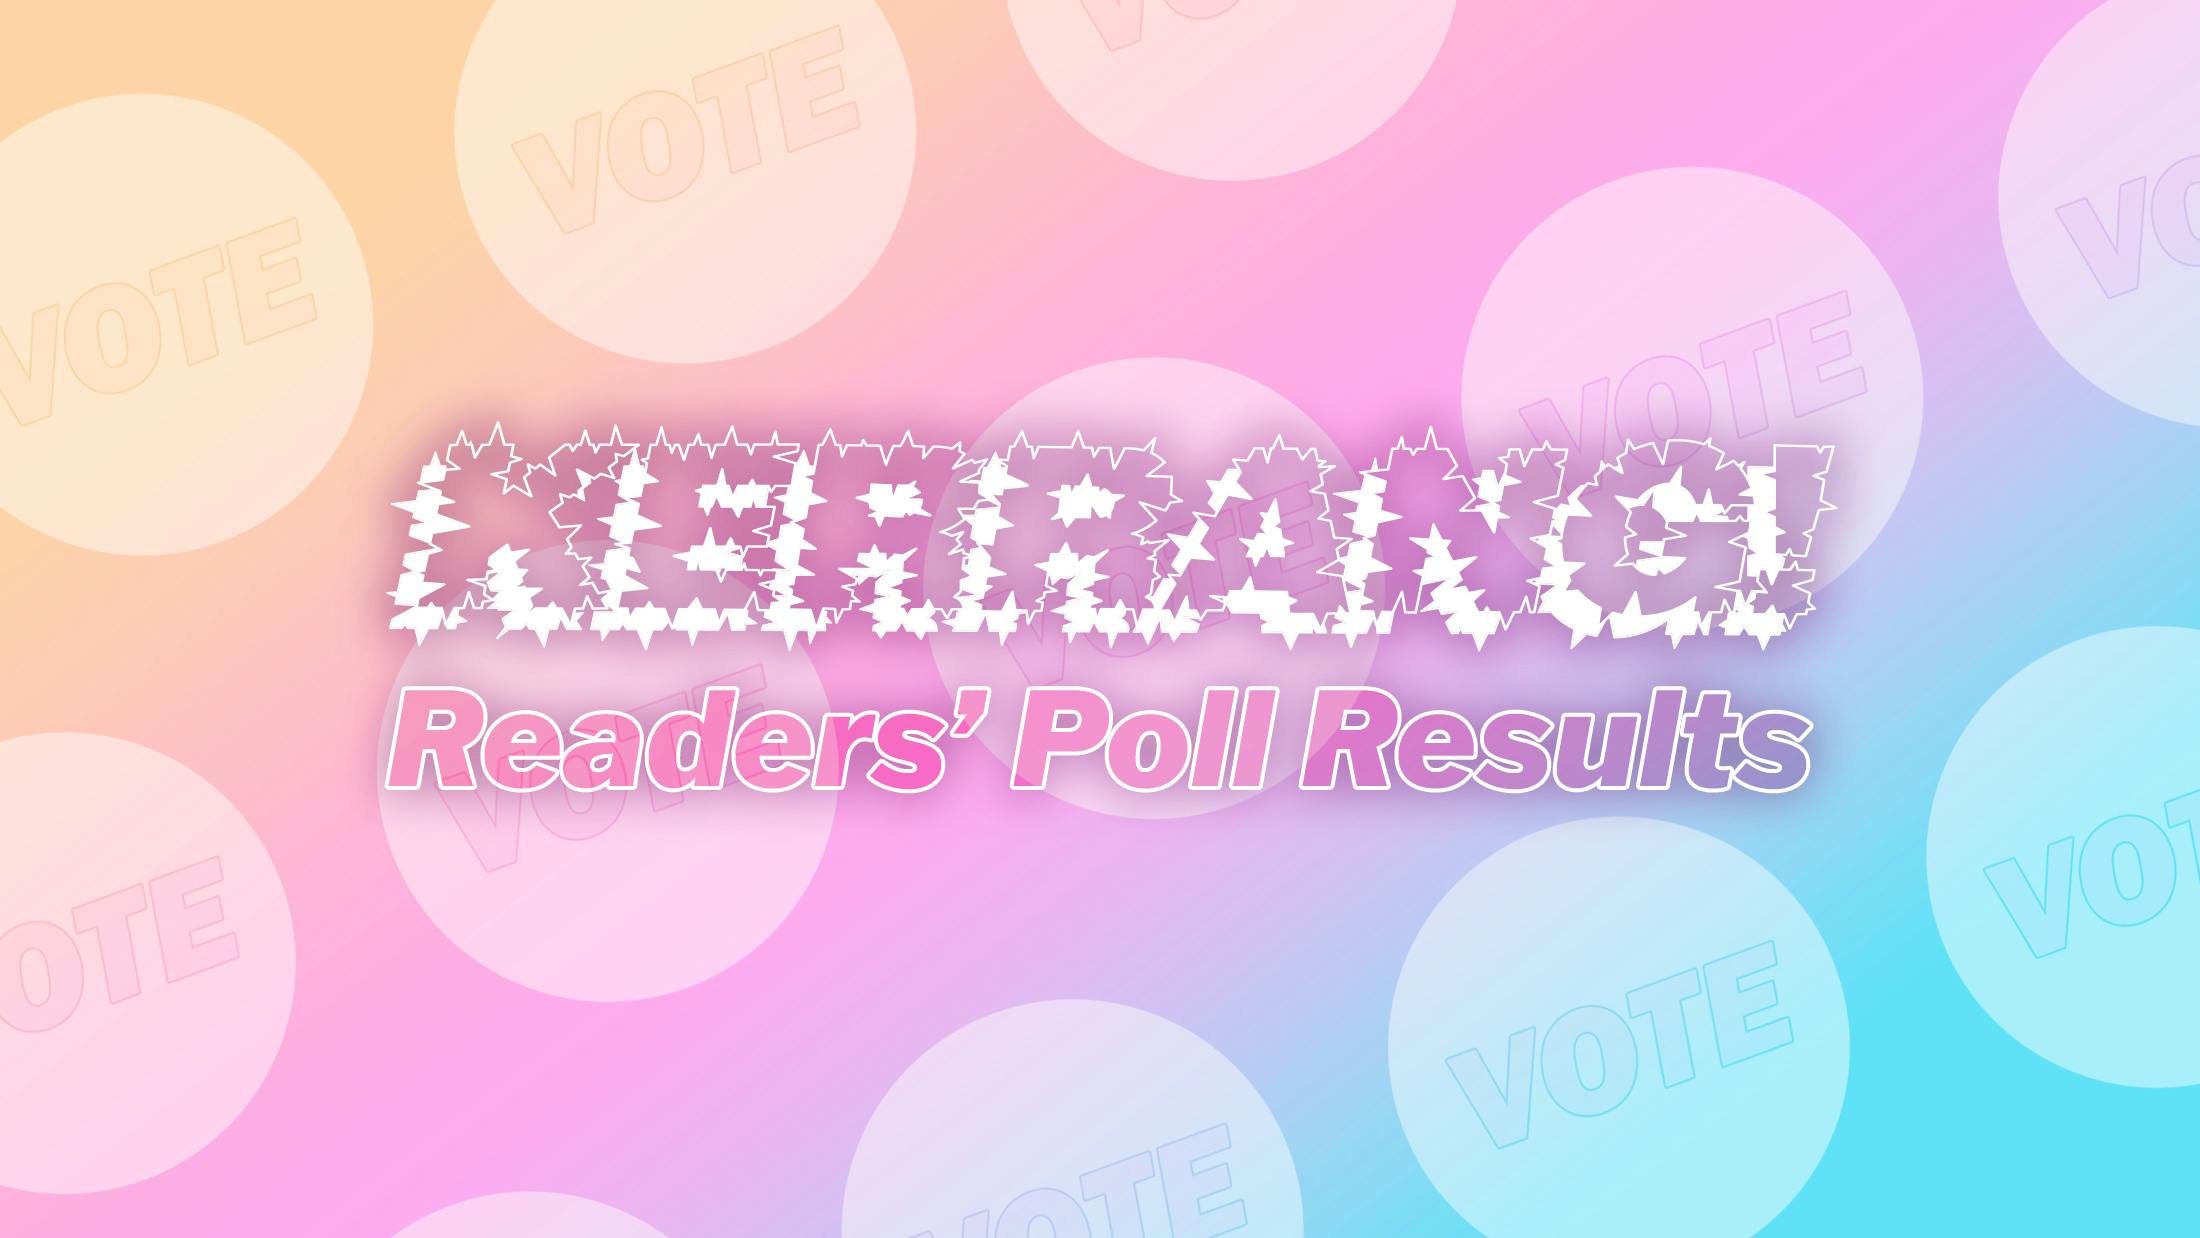 The 2021 Readers’ Poll Results: What has ruled your year?